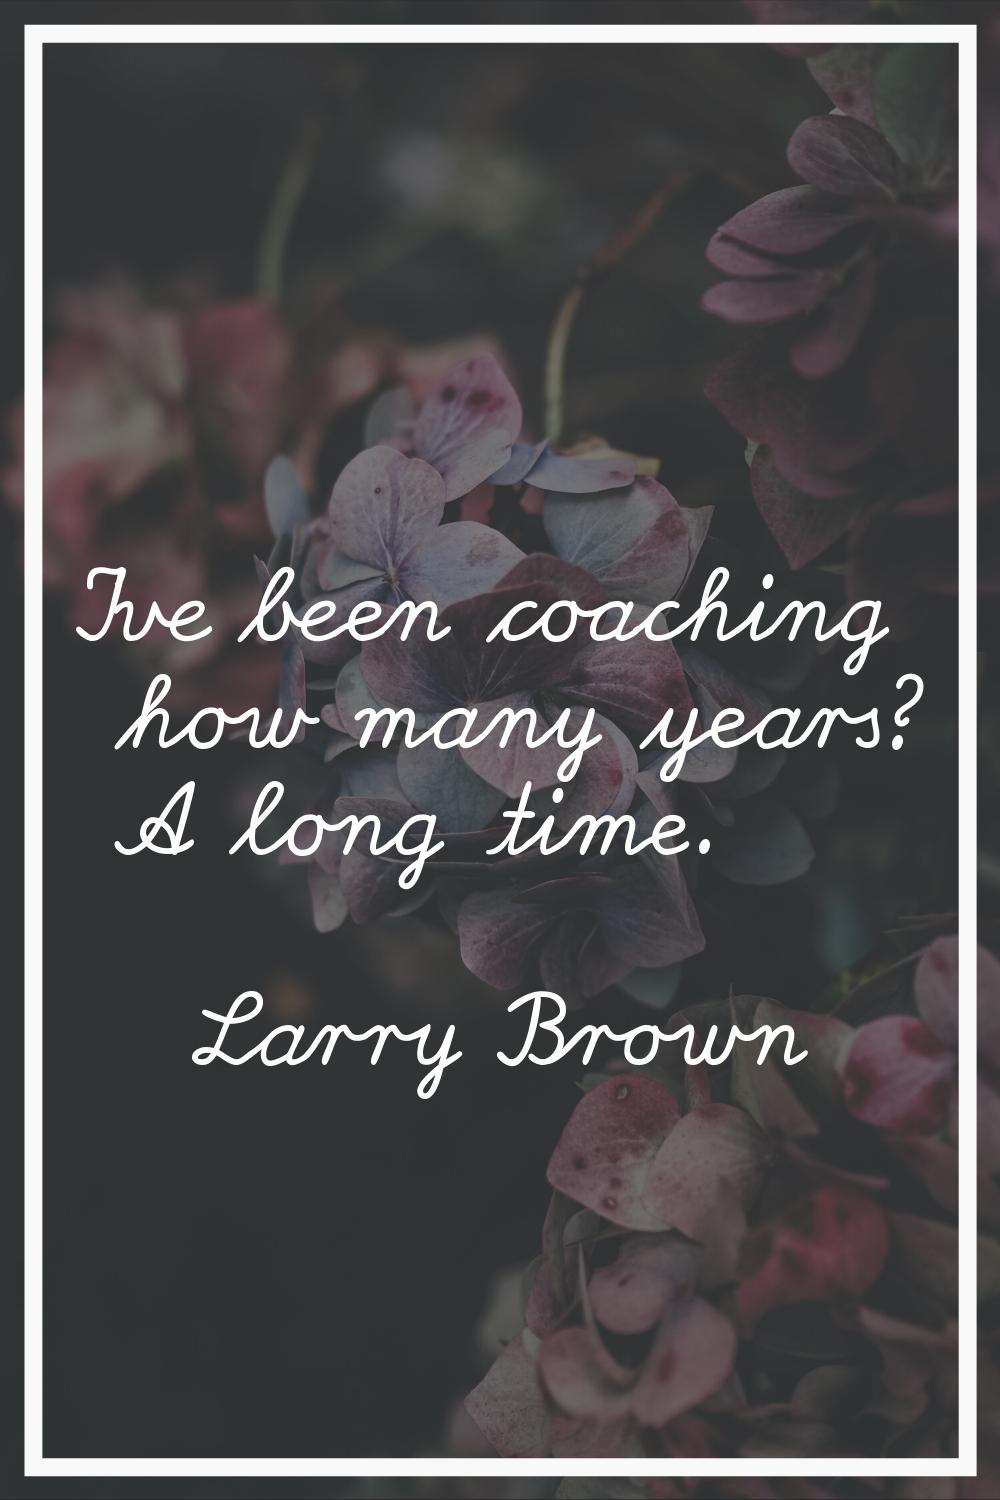 I've been coaching how many years? A long time.